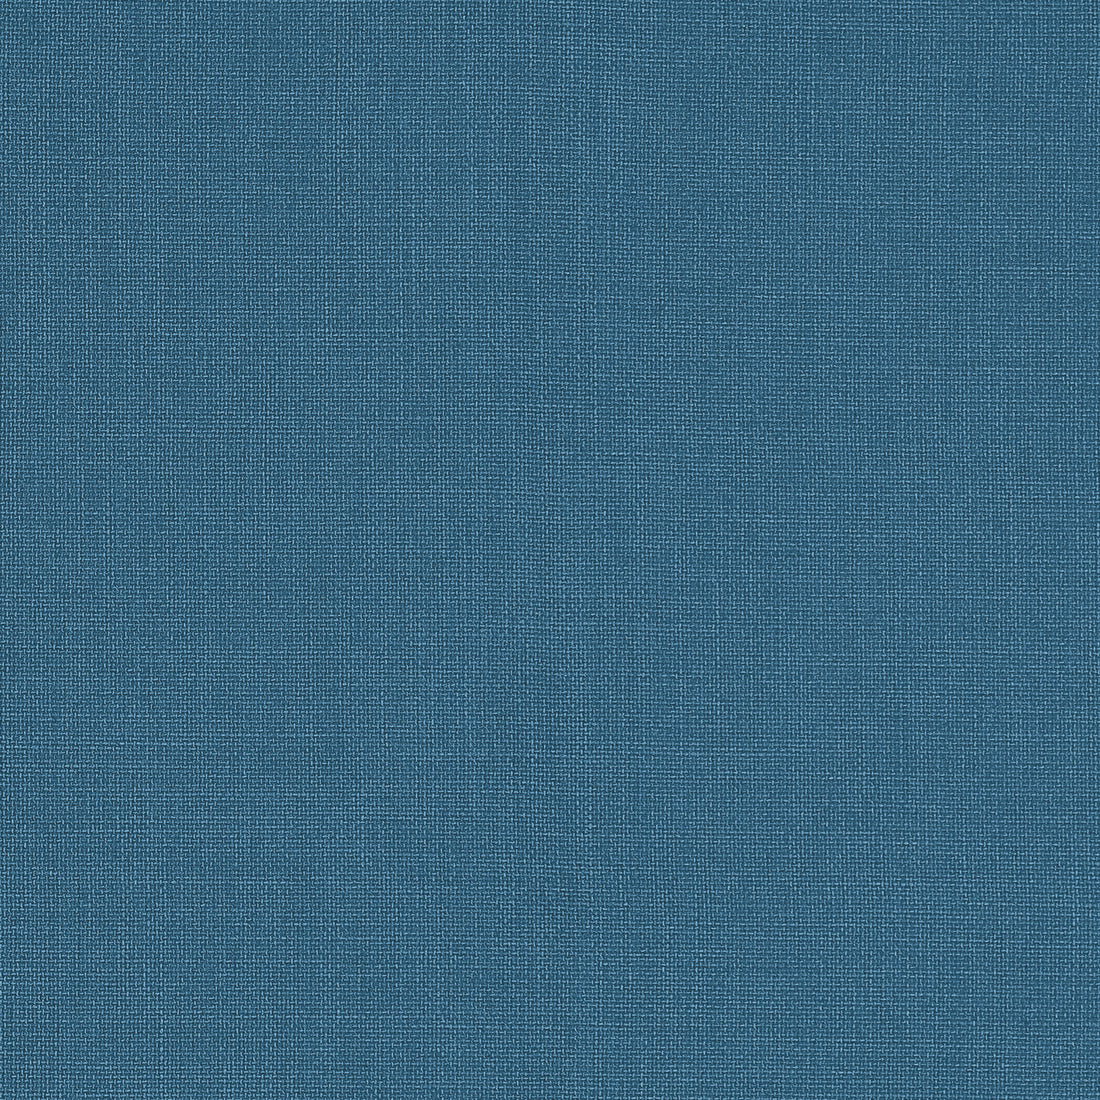 Brynn fabric in teal color - pattern number W81684 - by Thibaut in the Locale collection